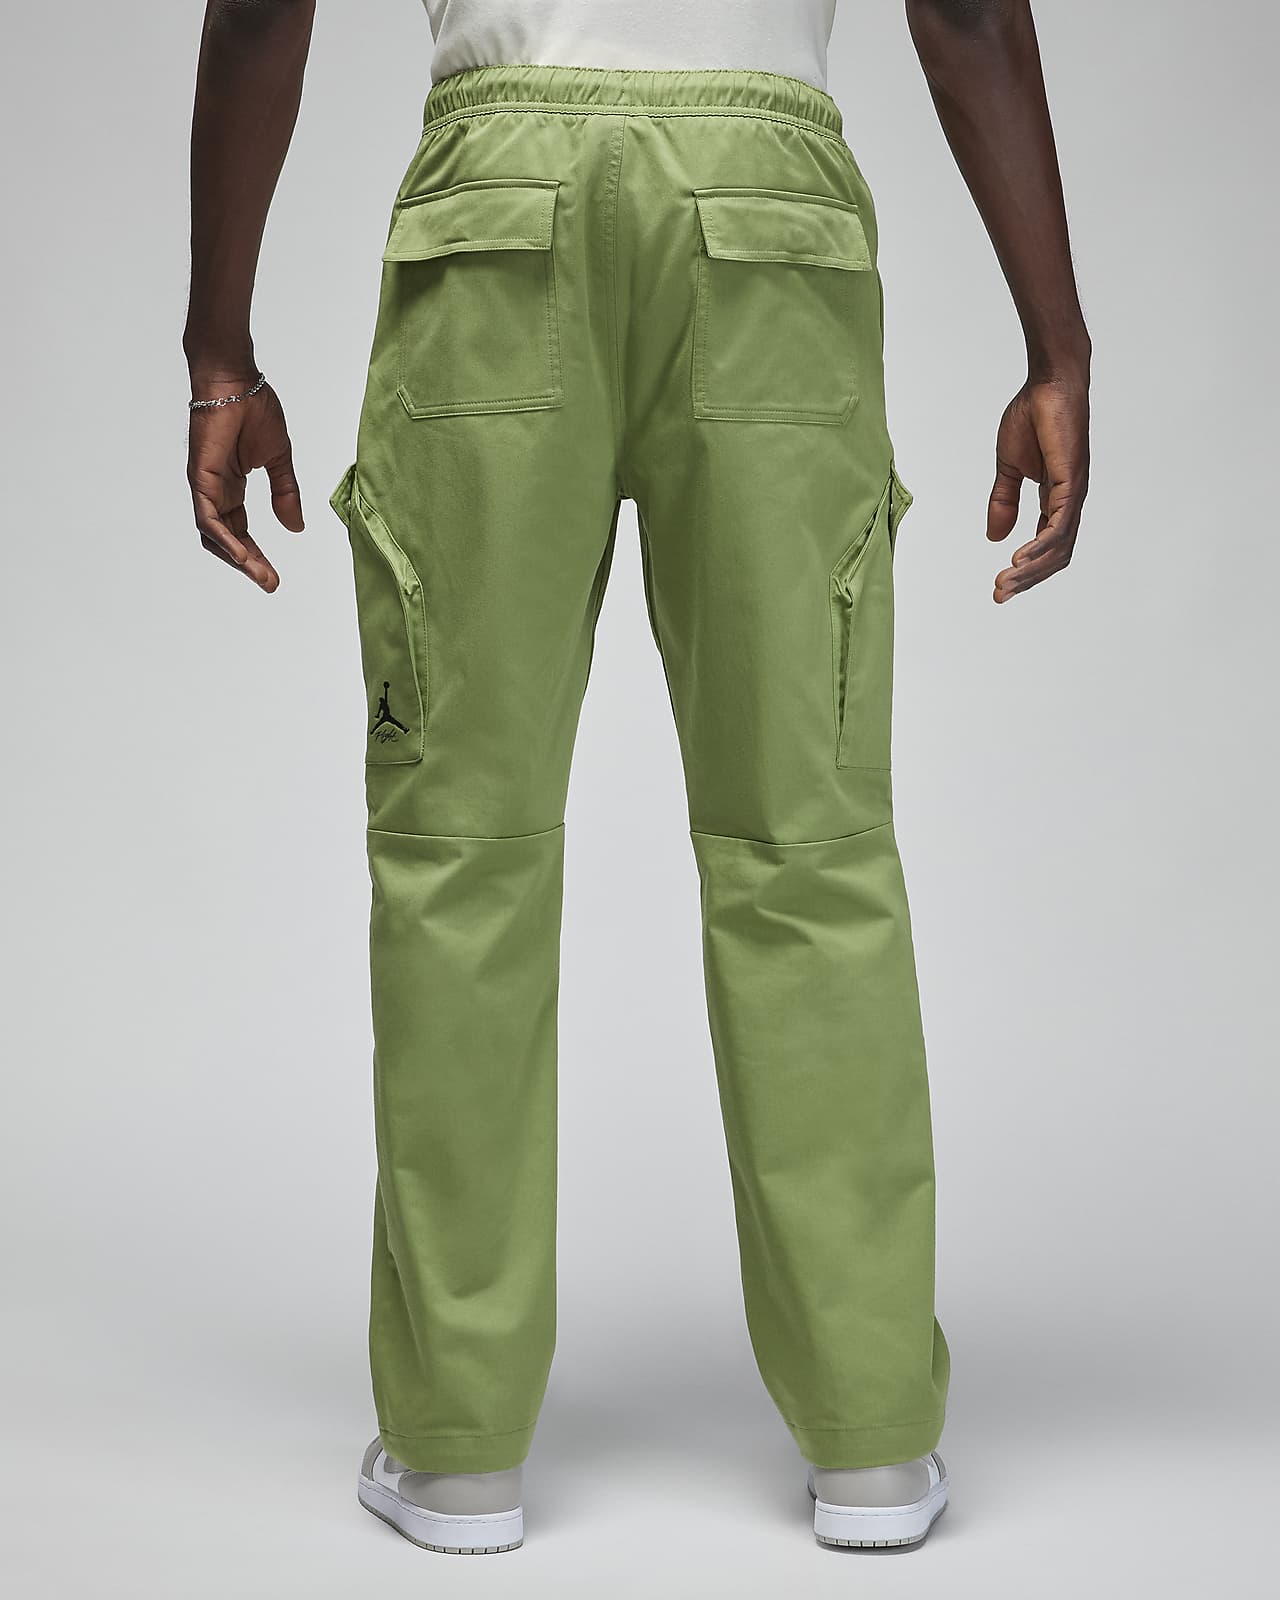 Keep It Casual Washed Pant Set - Olive